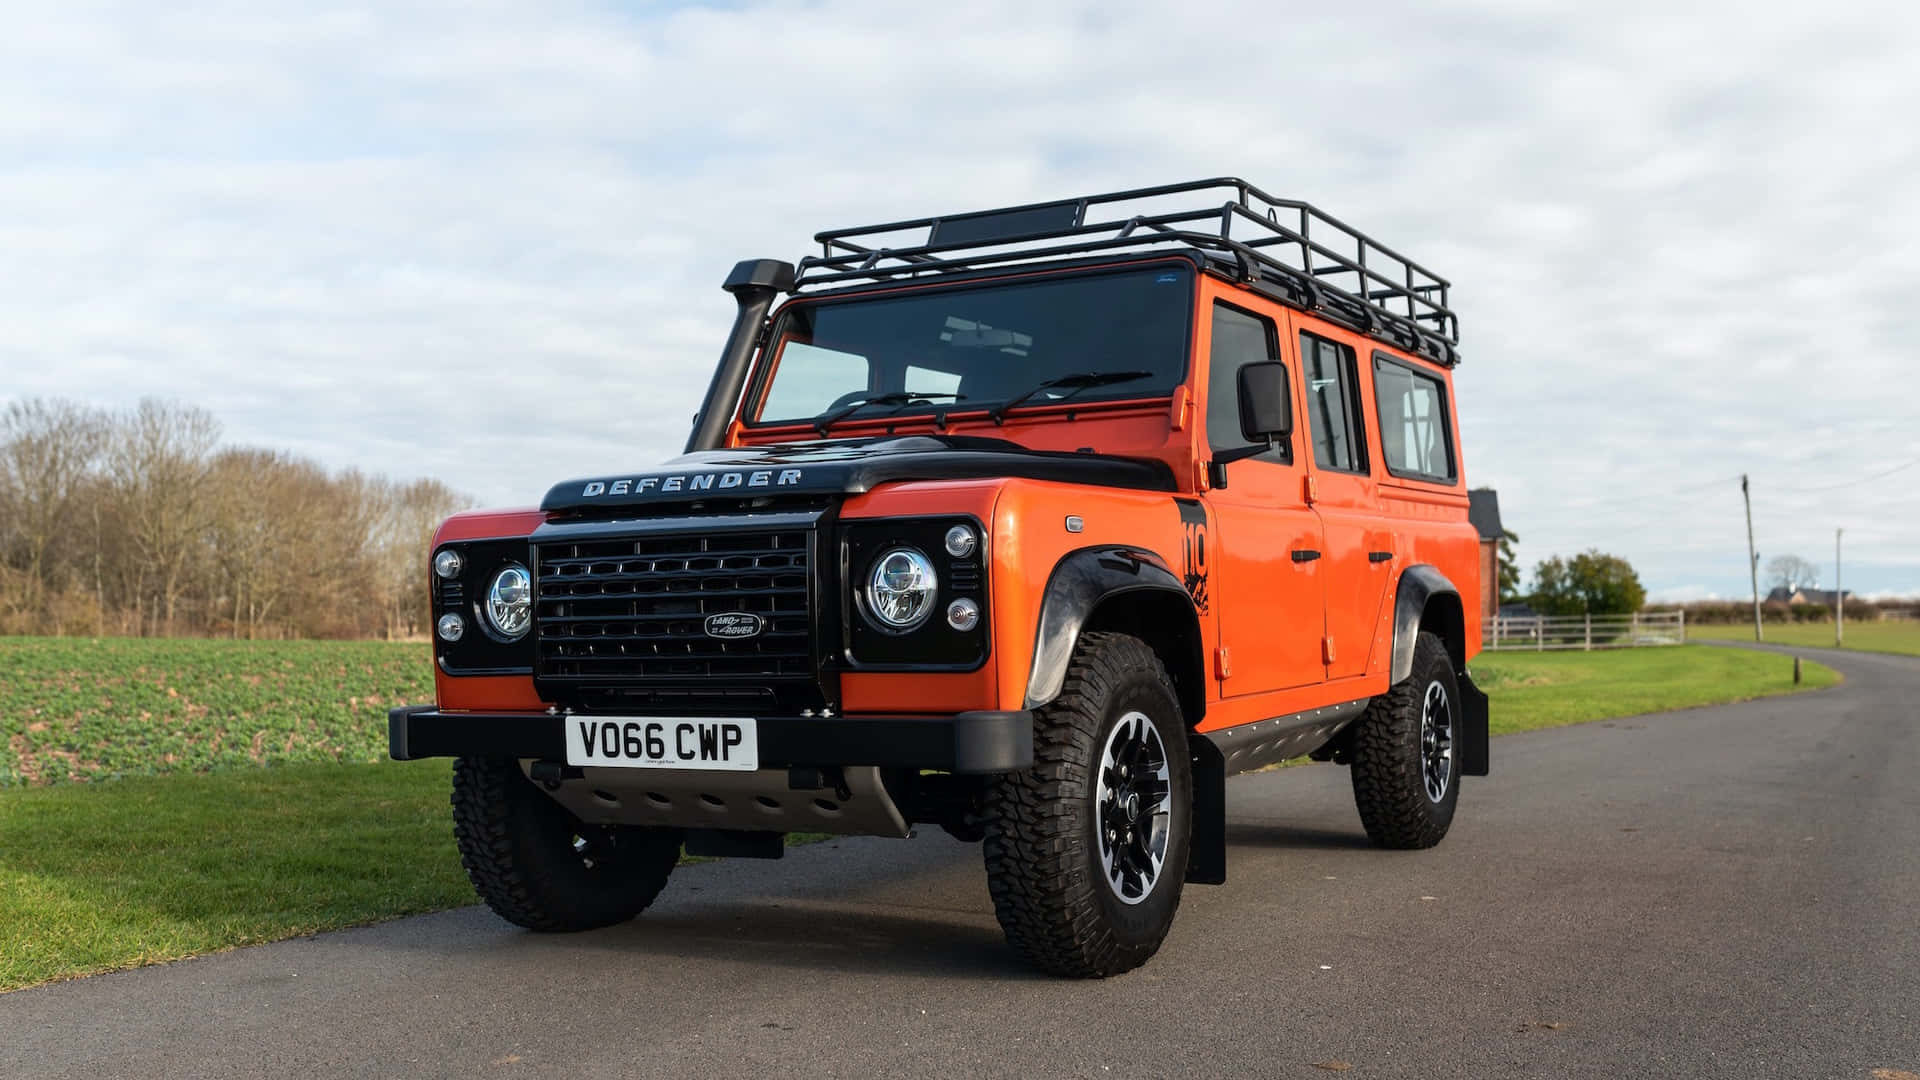 A Rugged Land Rover Defender Dominating the Off-Road Terrain Wallpaper